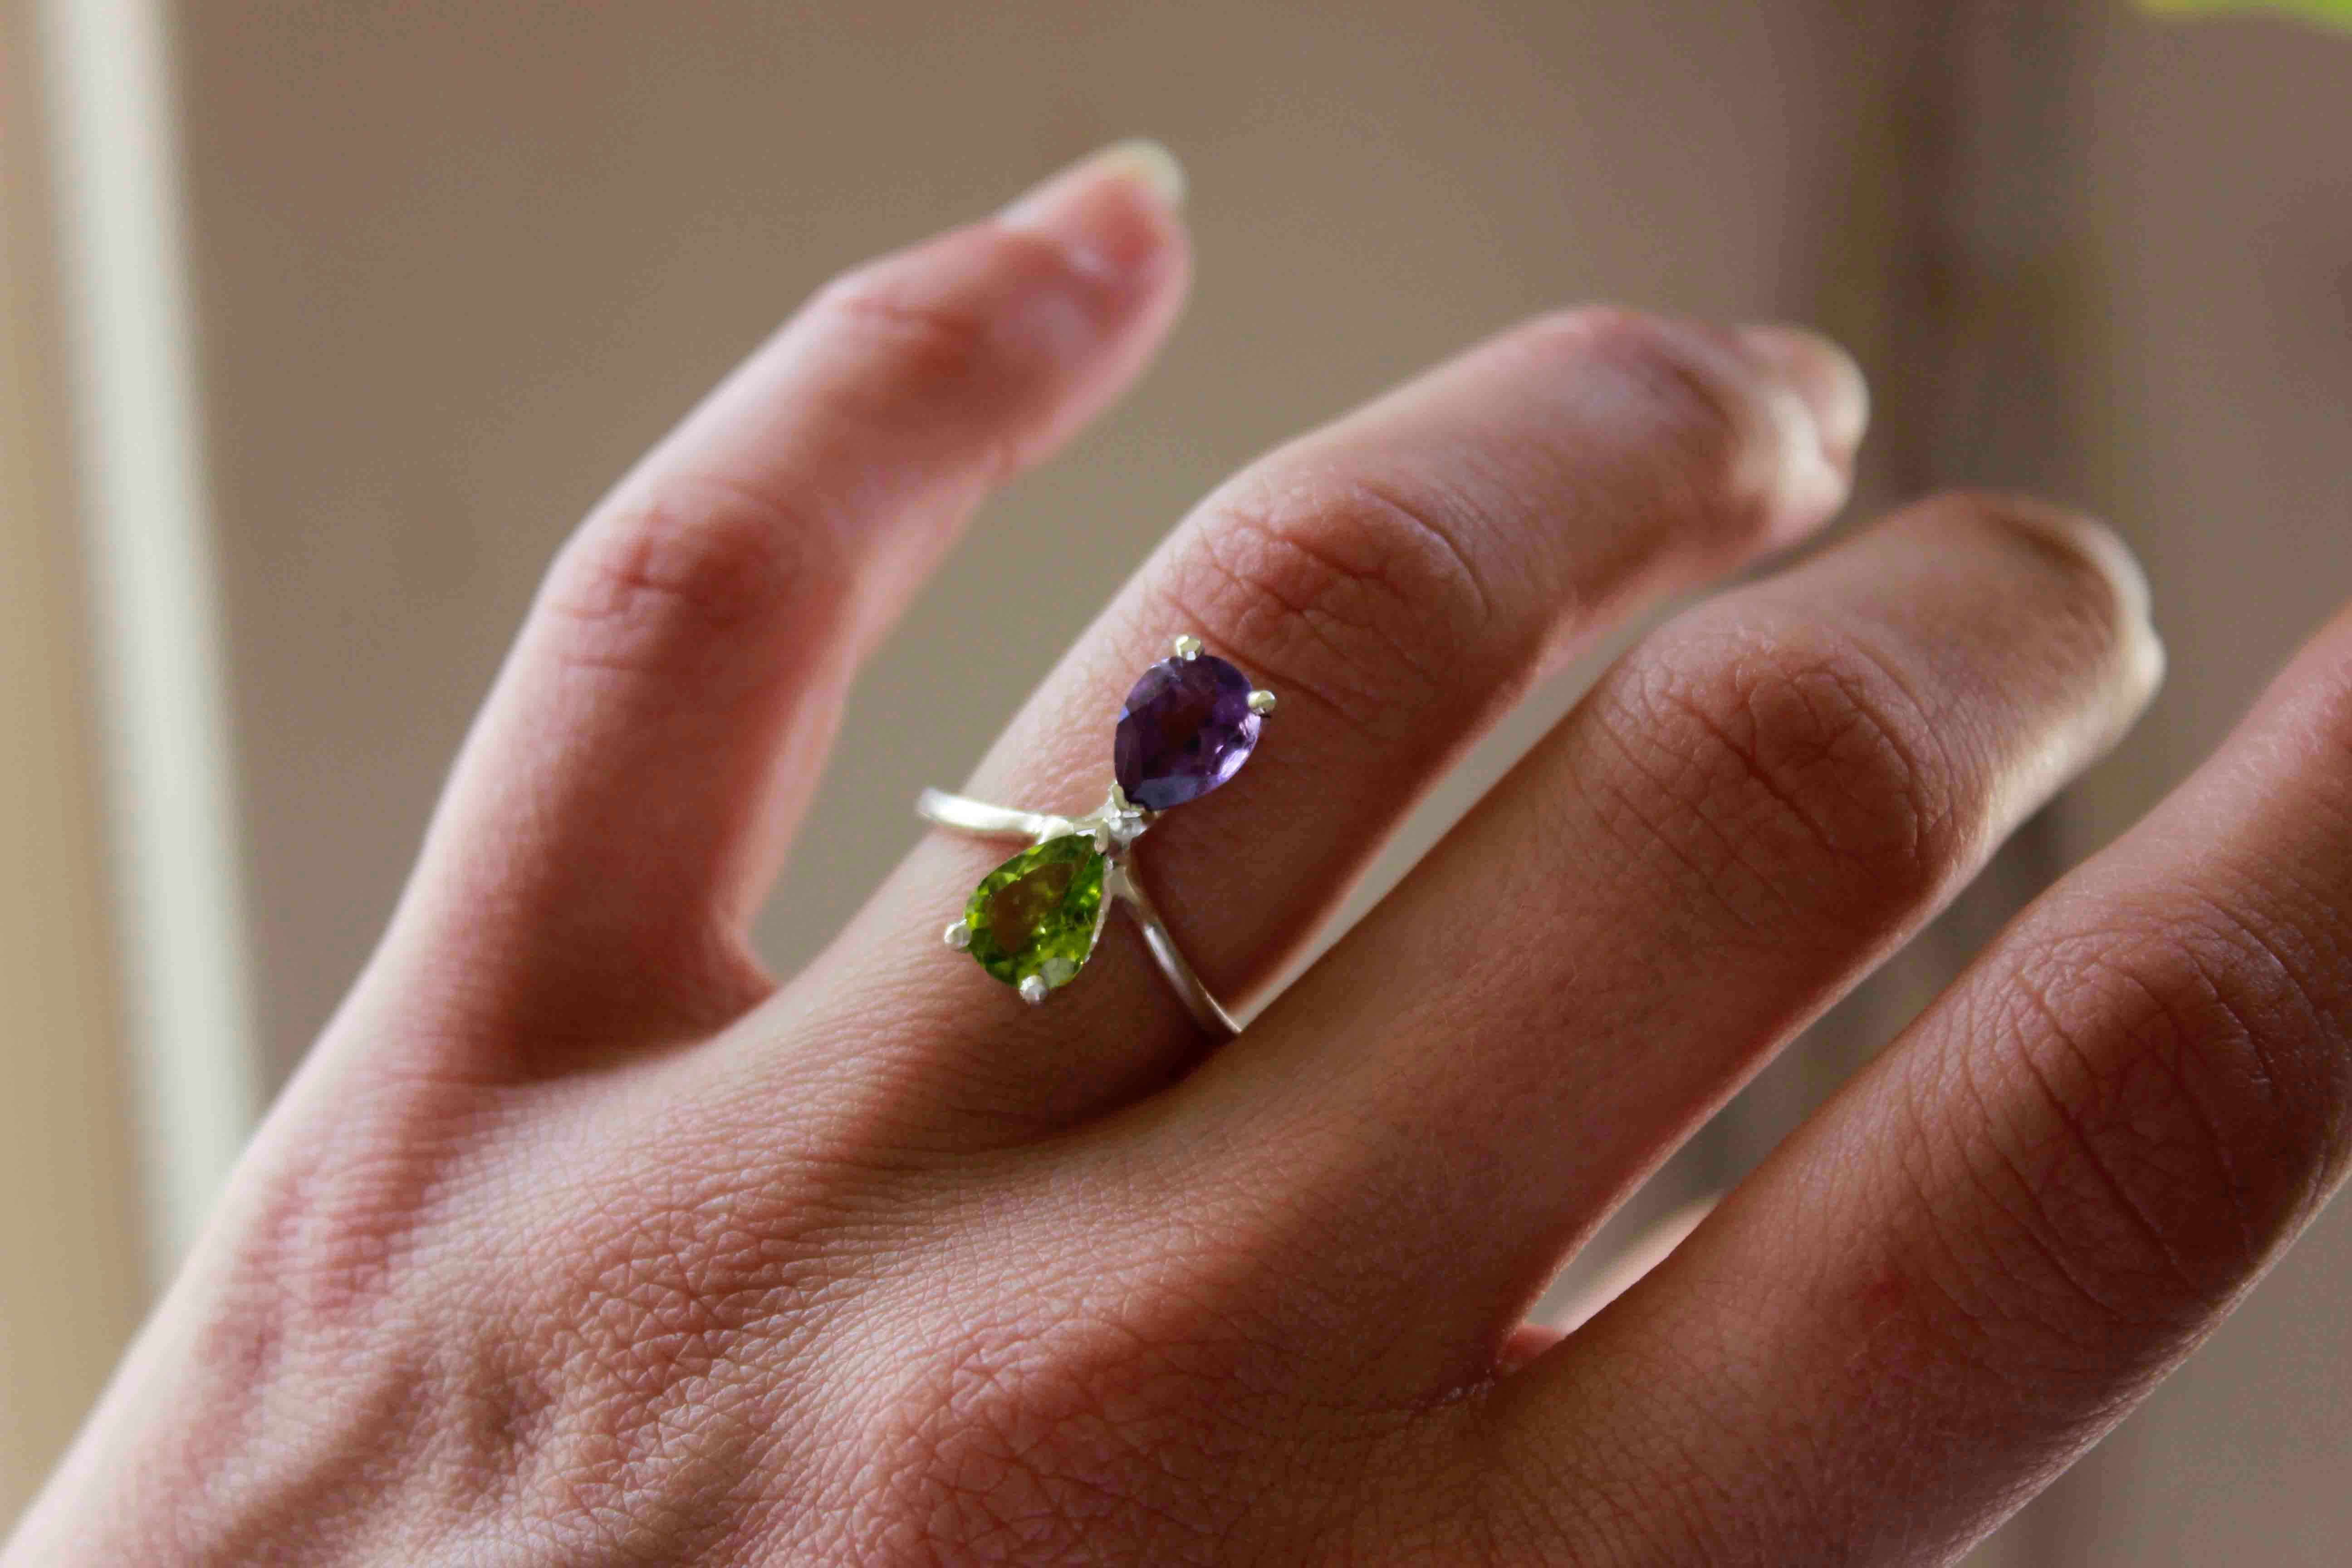 Double Amethyst and Peridot Ring

A magical silver ring featuring two stones, an amethyst and a peridot.

This is perfect statement ring to complete your summer outfits.

Stones size 6×8 mm

Your ring will be made to order in your size,